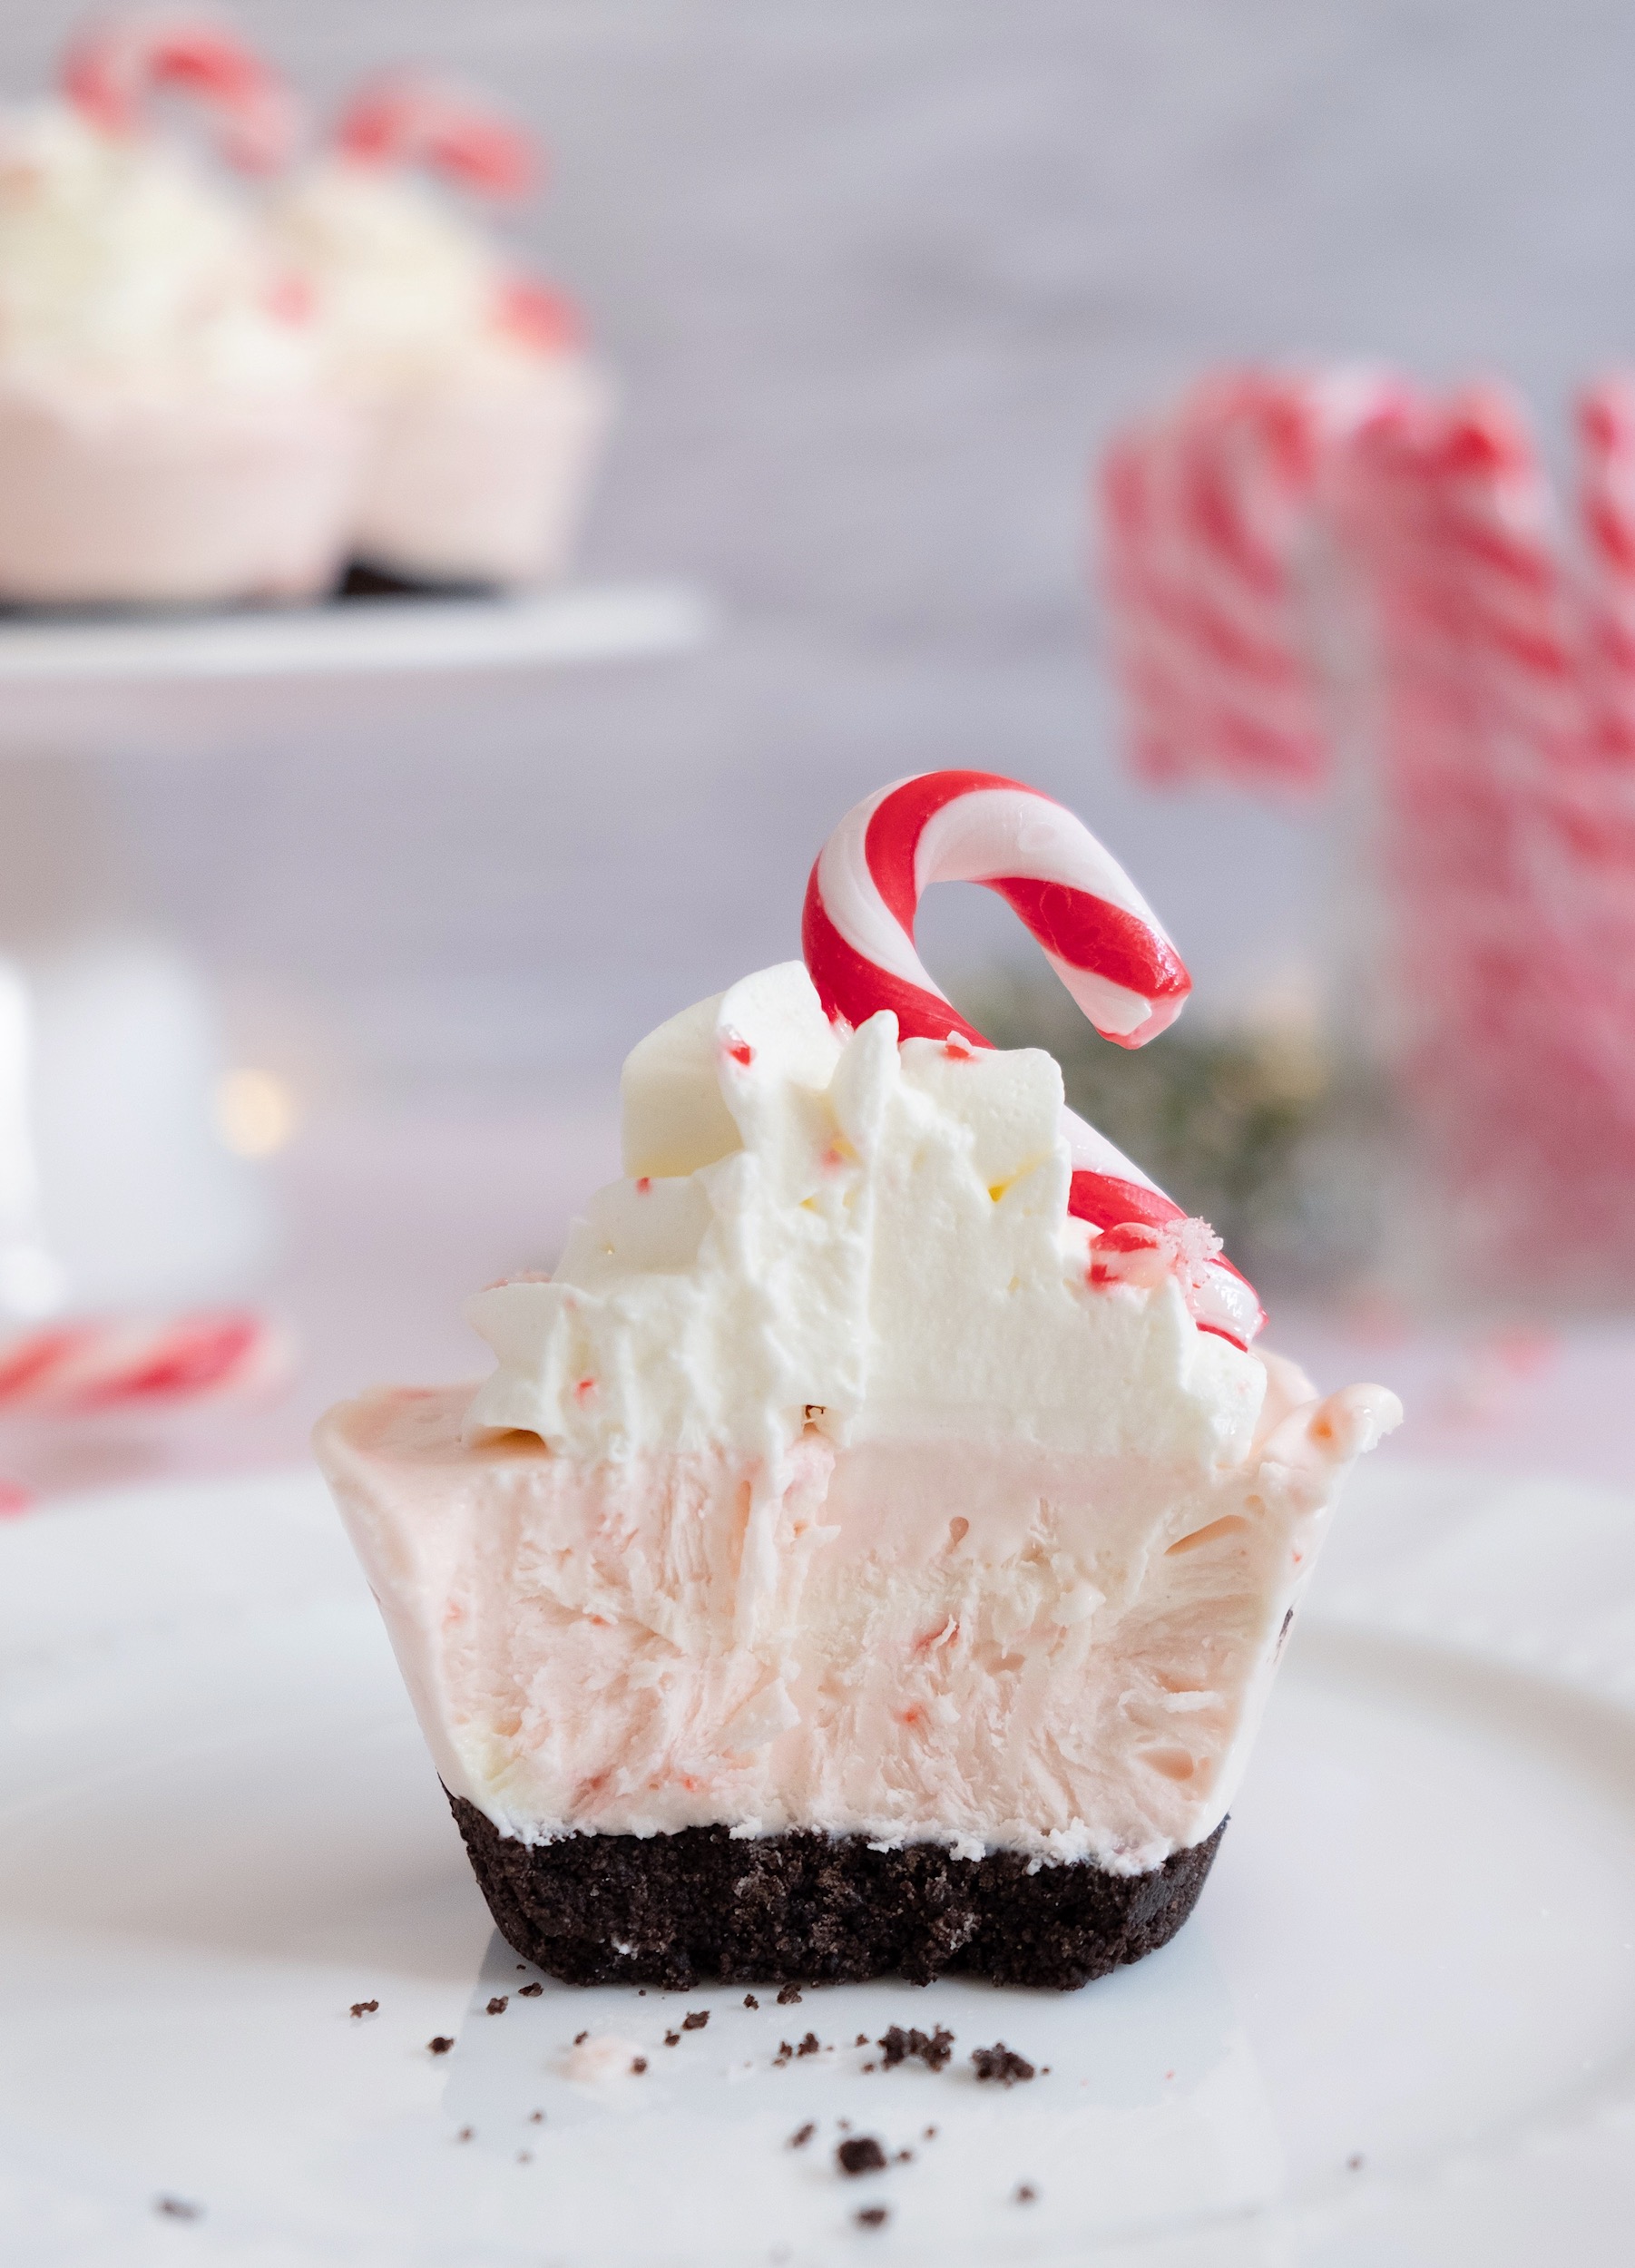 https://cremedelacombe.com/wp-content/uploads/2022/12/No-Bake-Candy-Cane-Cheesecakes-1.jpg